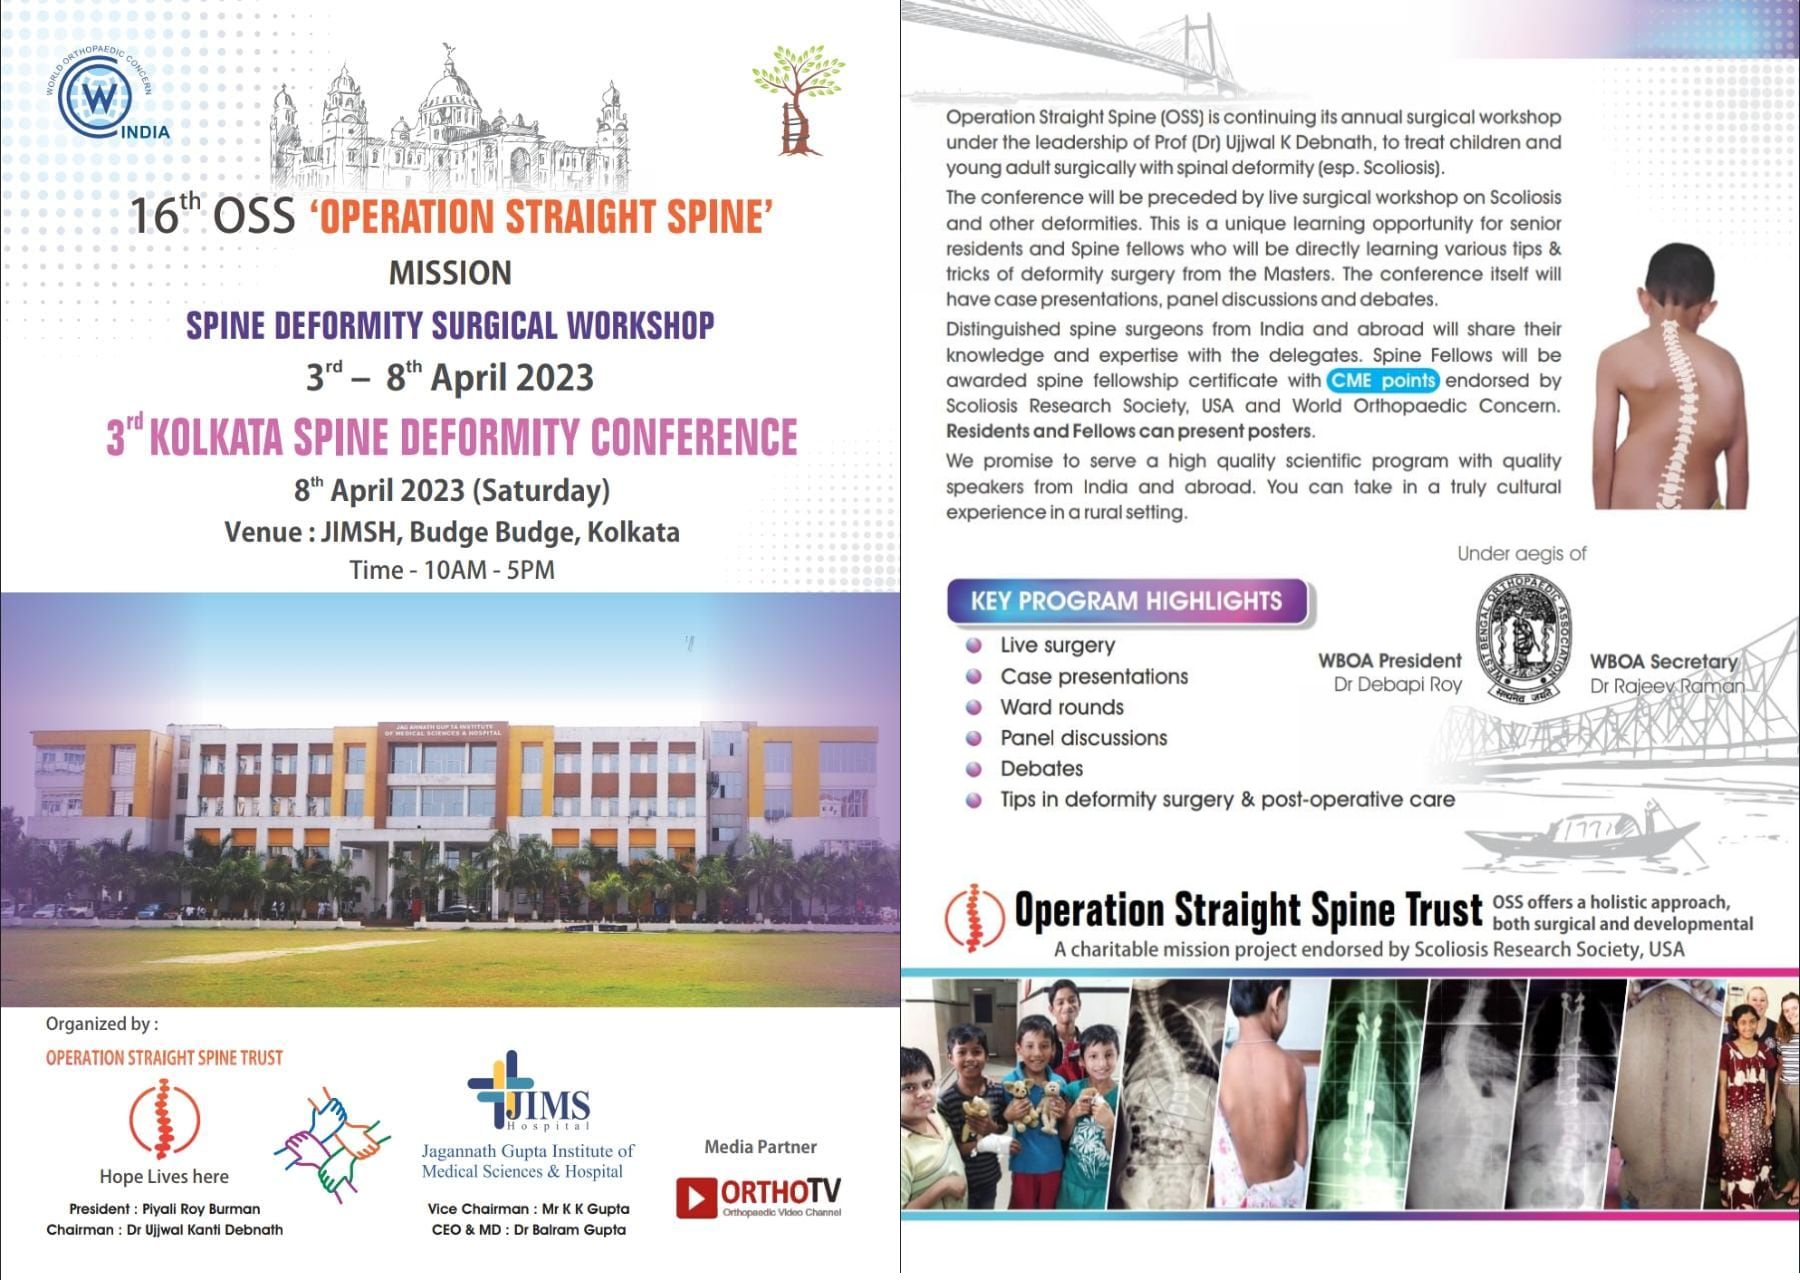 16th OSS OPERATION STRAIGHT SPINE MISSION - SPINE DEFORMITY SURGICAL WORKSHOP